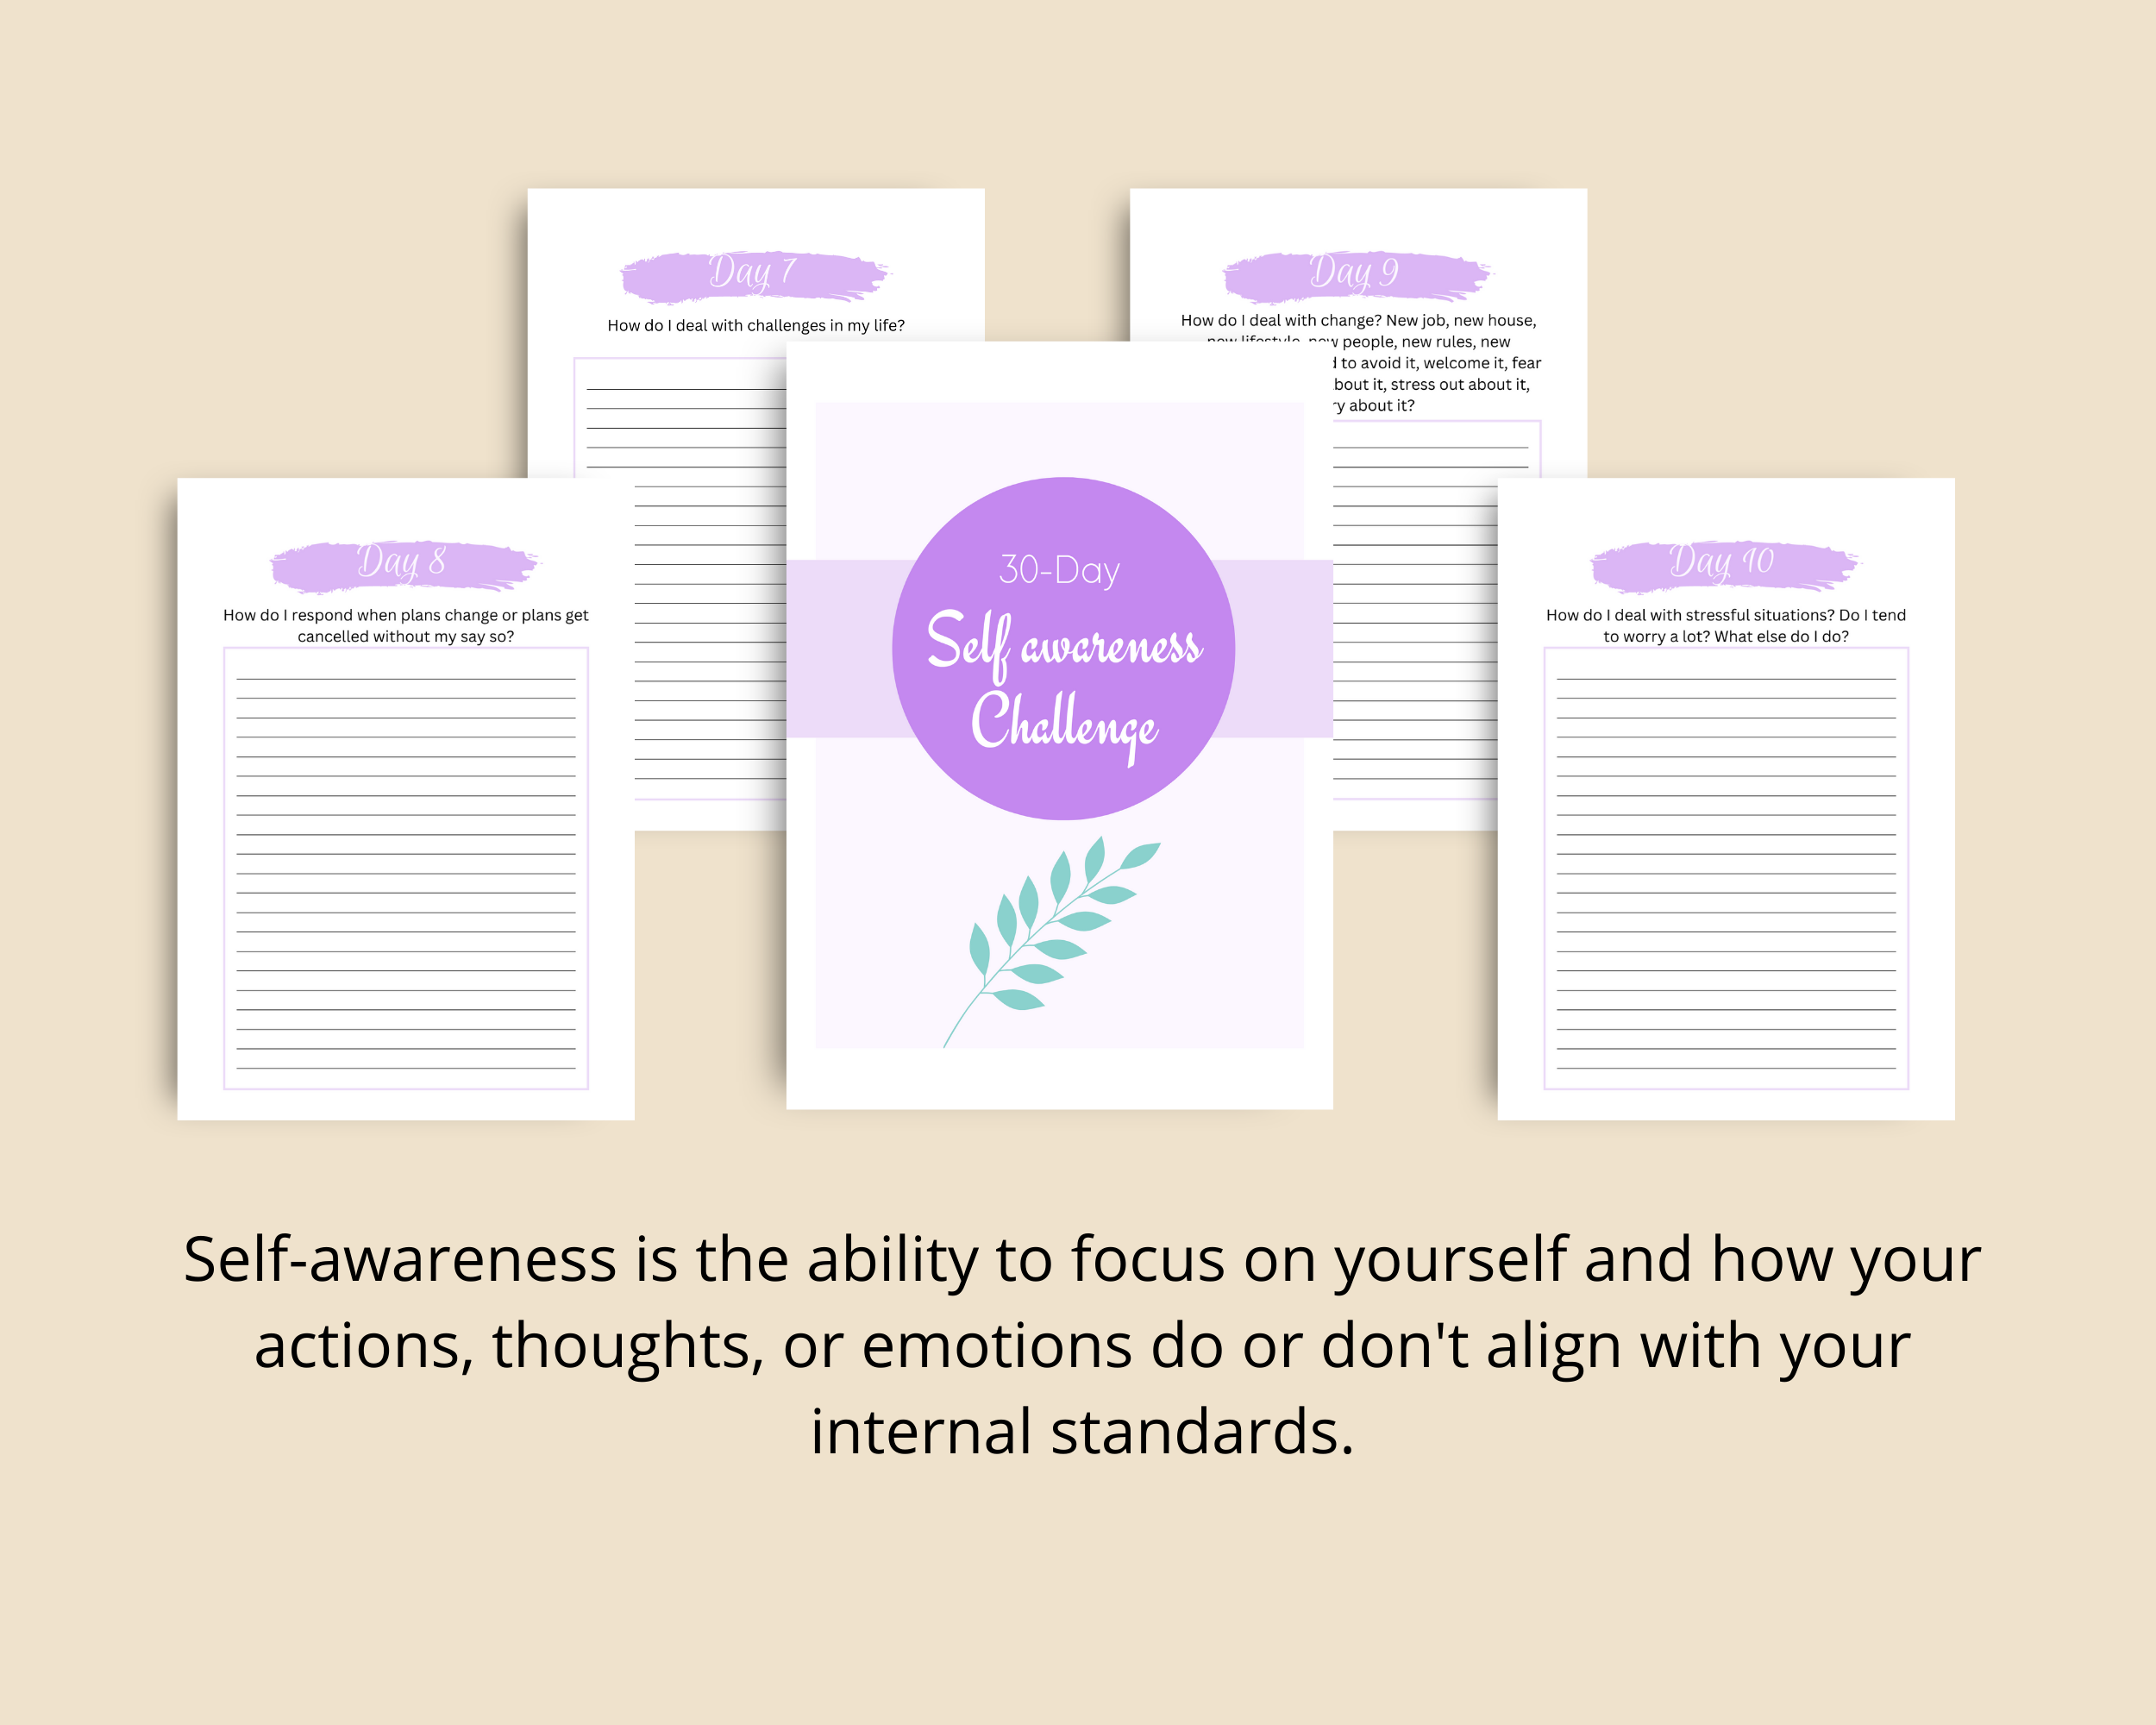 30-Day Self Awareness Challenge | Editable Canva Template A4 Size